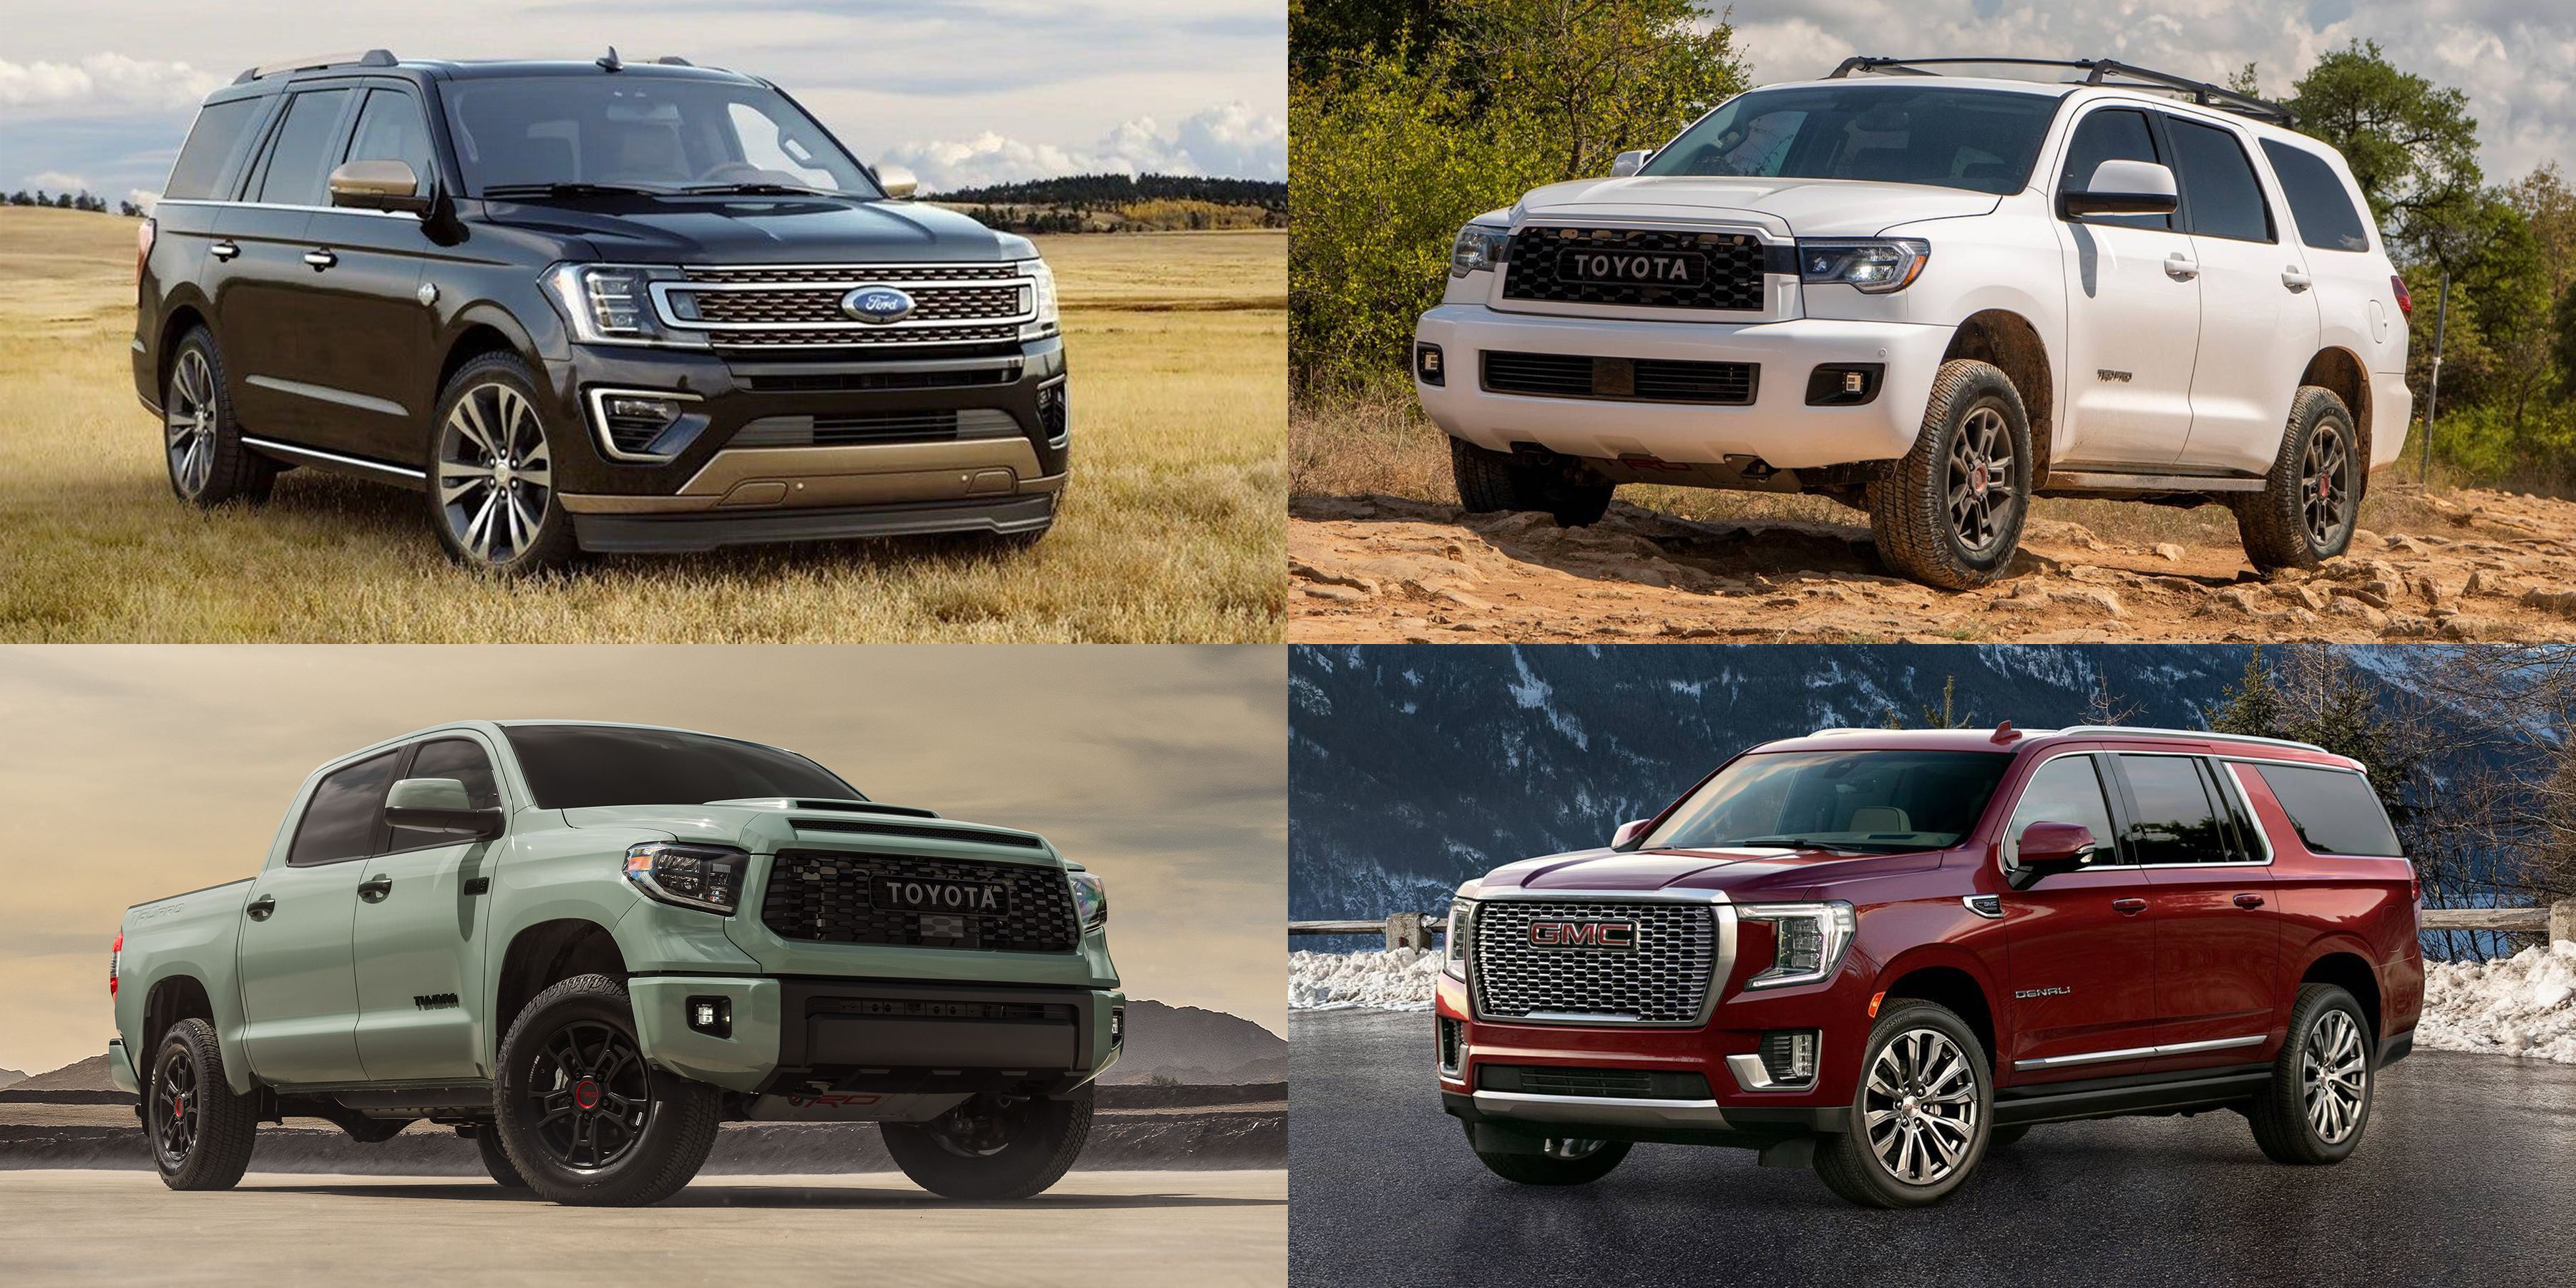 The Top 16 Vehicles Most Likely to Reach 200,000 Miles